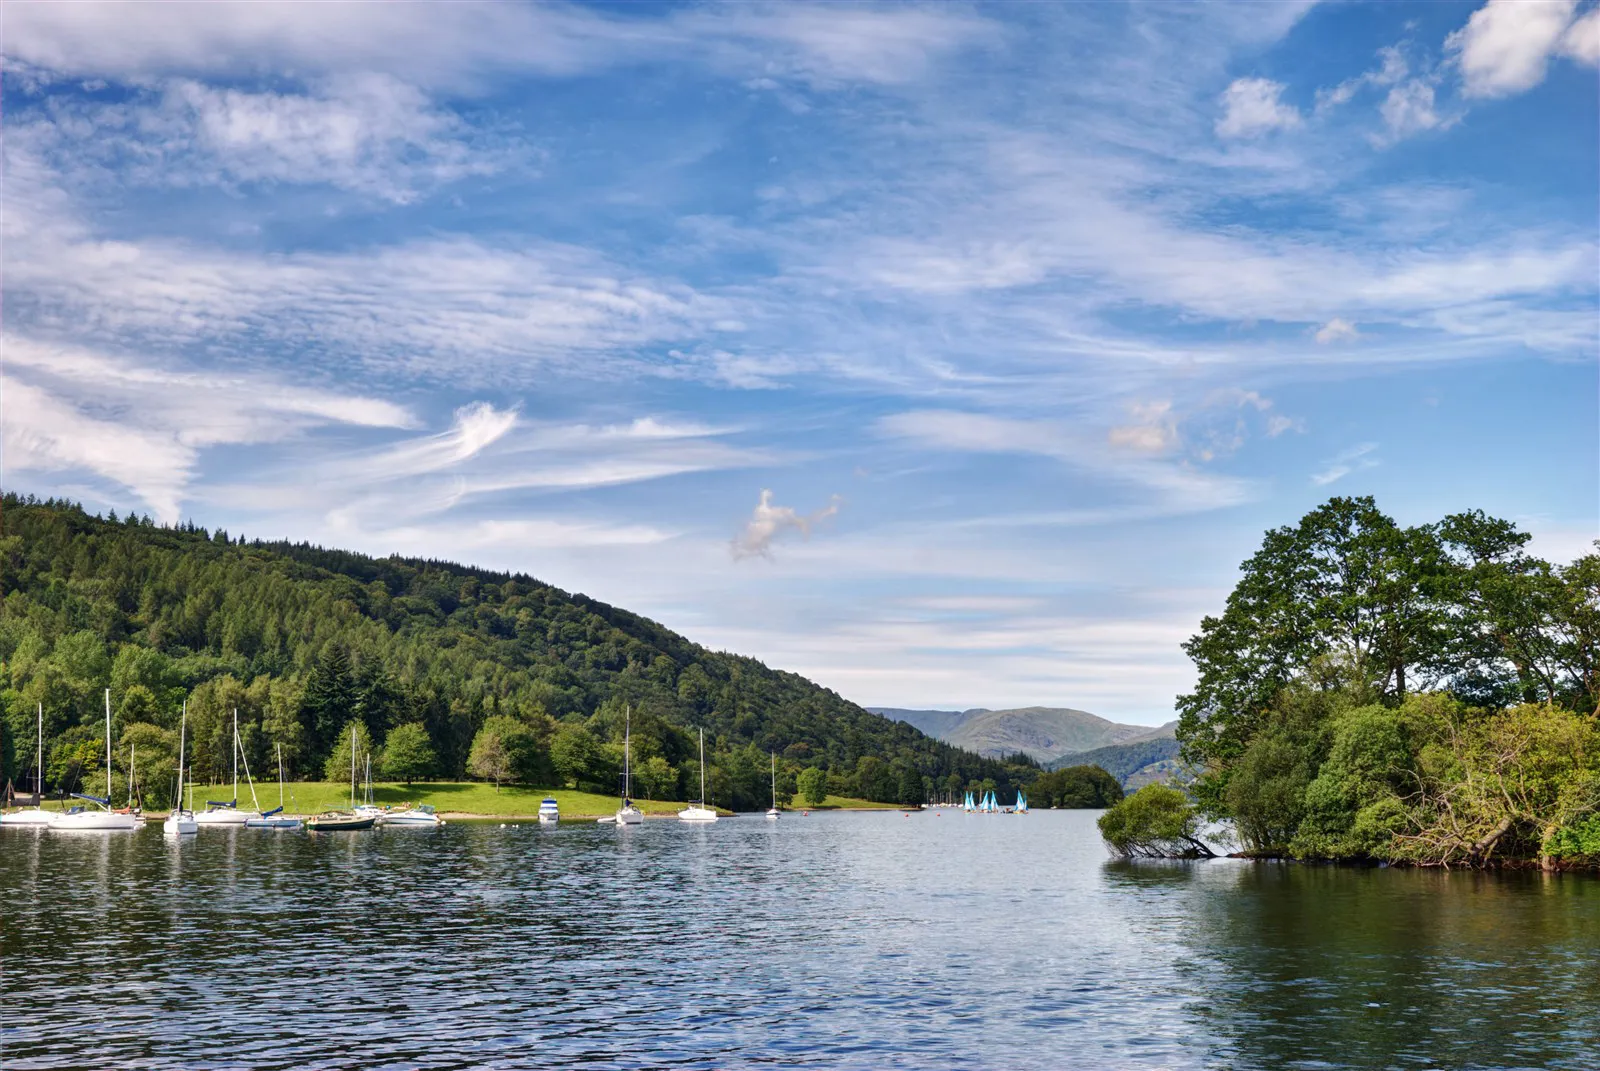 Lake District boat hire: What to know before you go